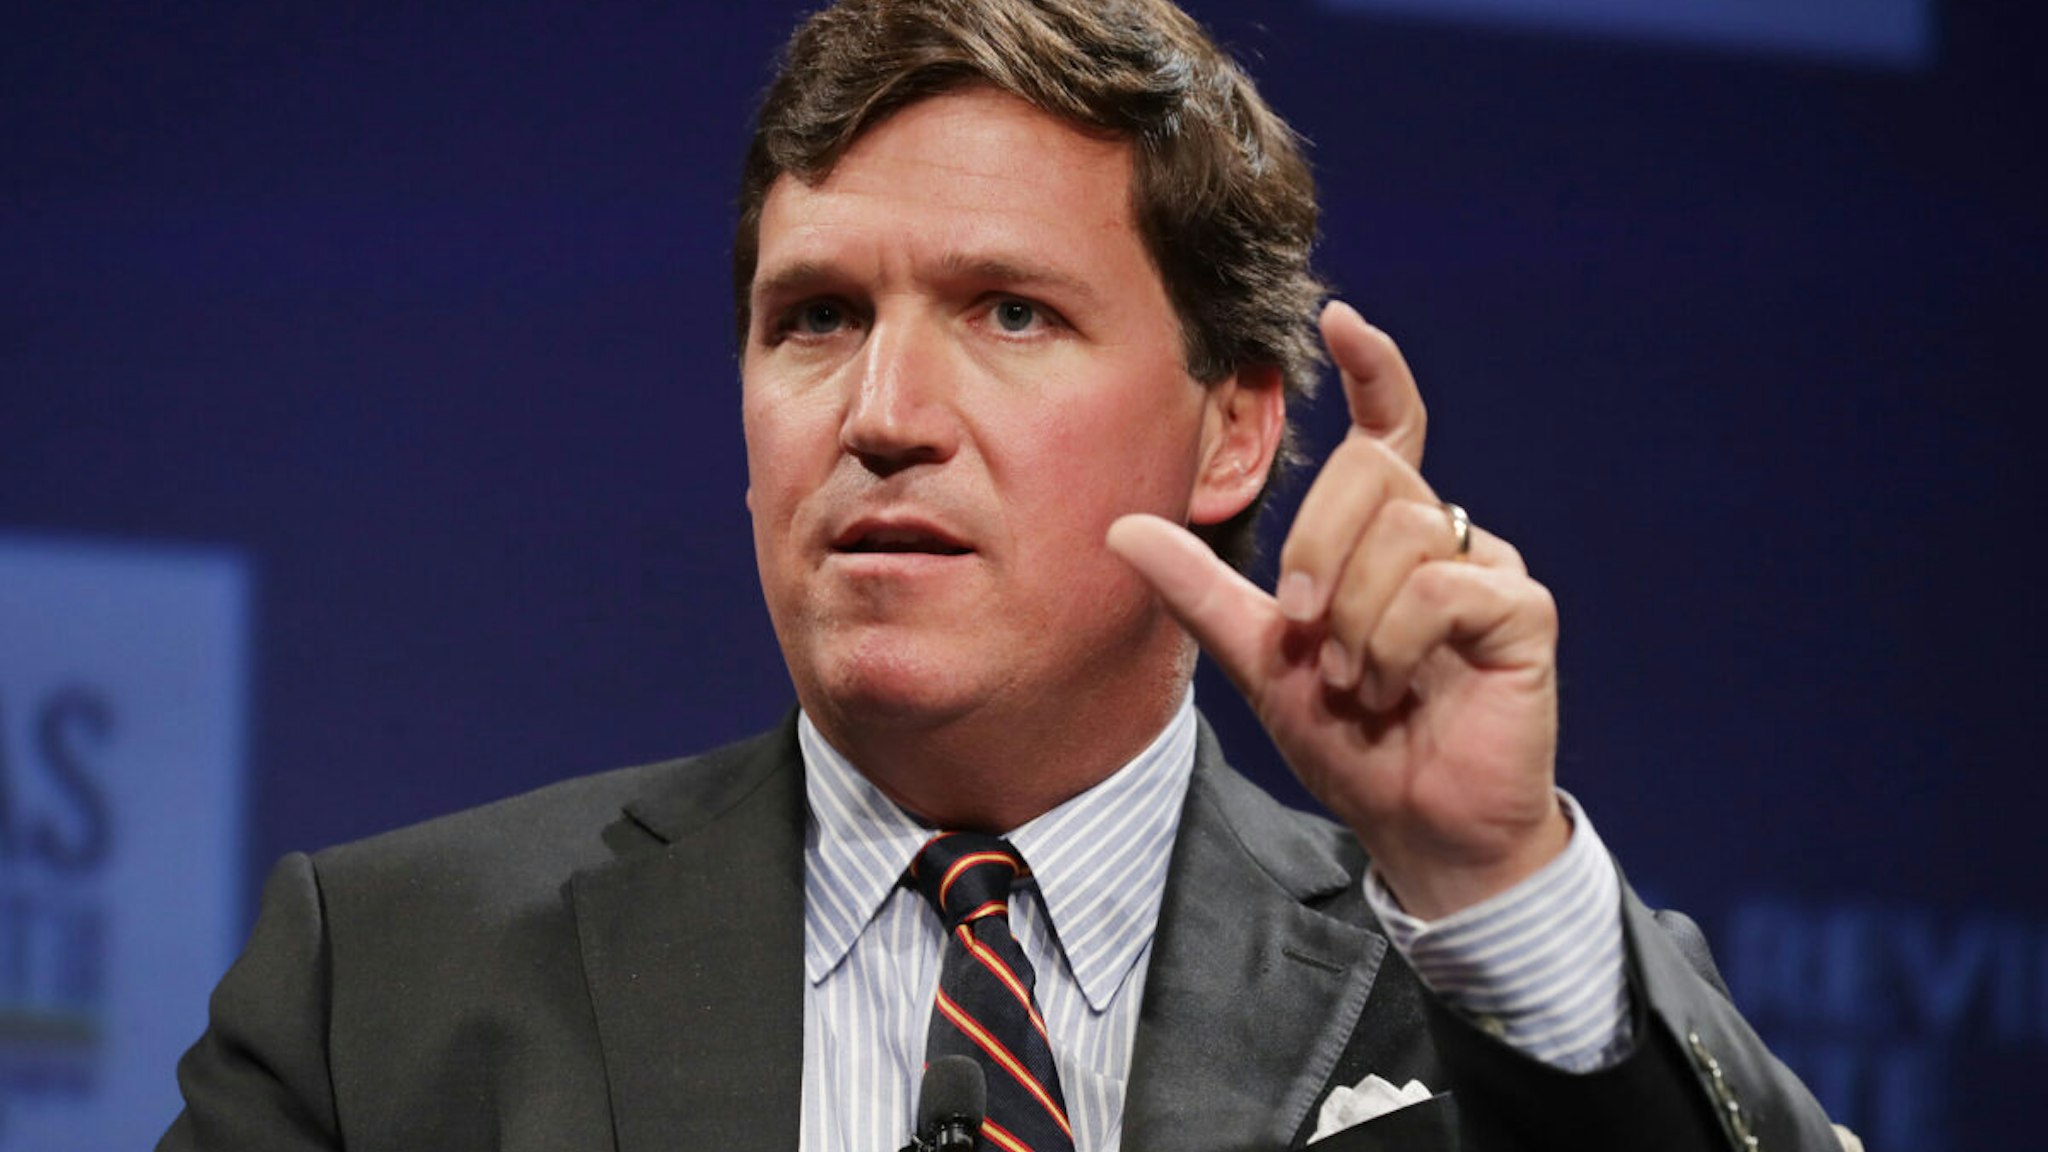 Fox News host Tucker Carlson discusses 'Populism and the Right' during the National Review Institute's Ideas Summit at the Mandarin Oriental Hotel March 29, 2019 in Washington, DC.